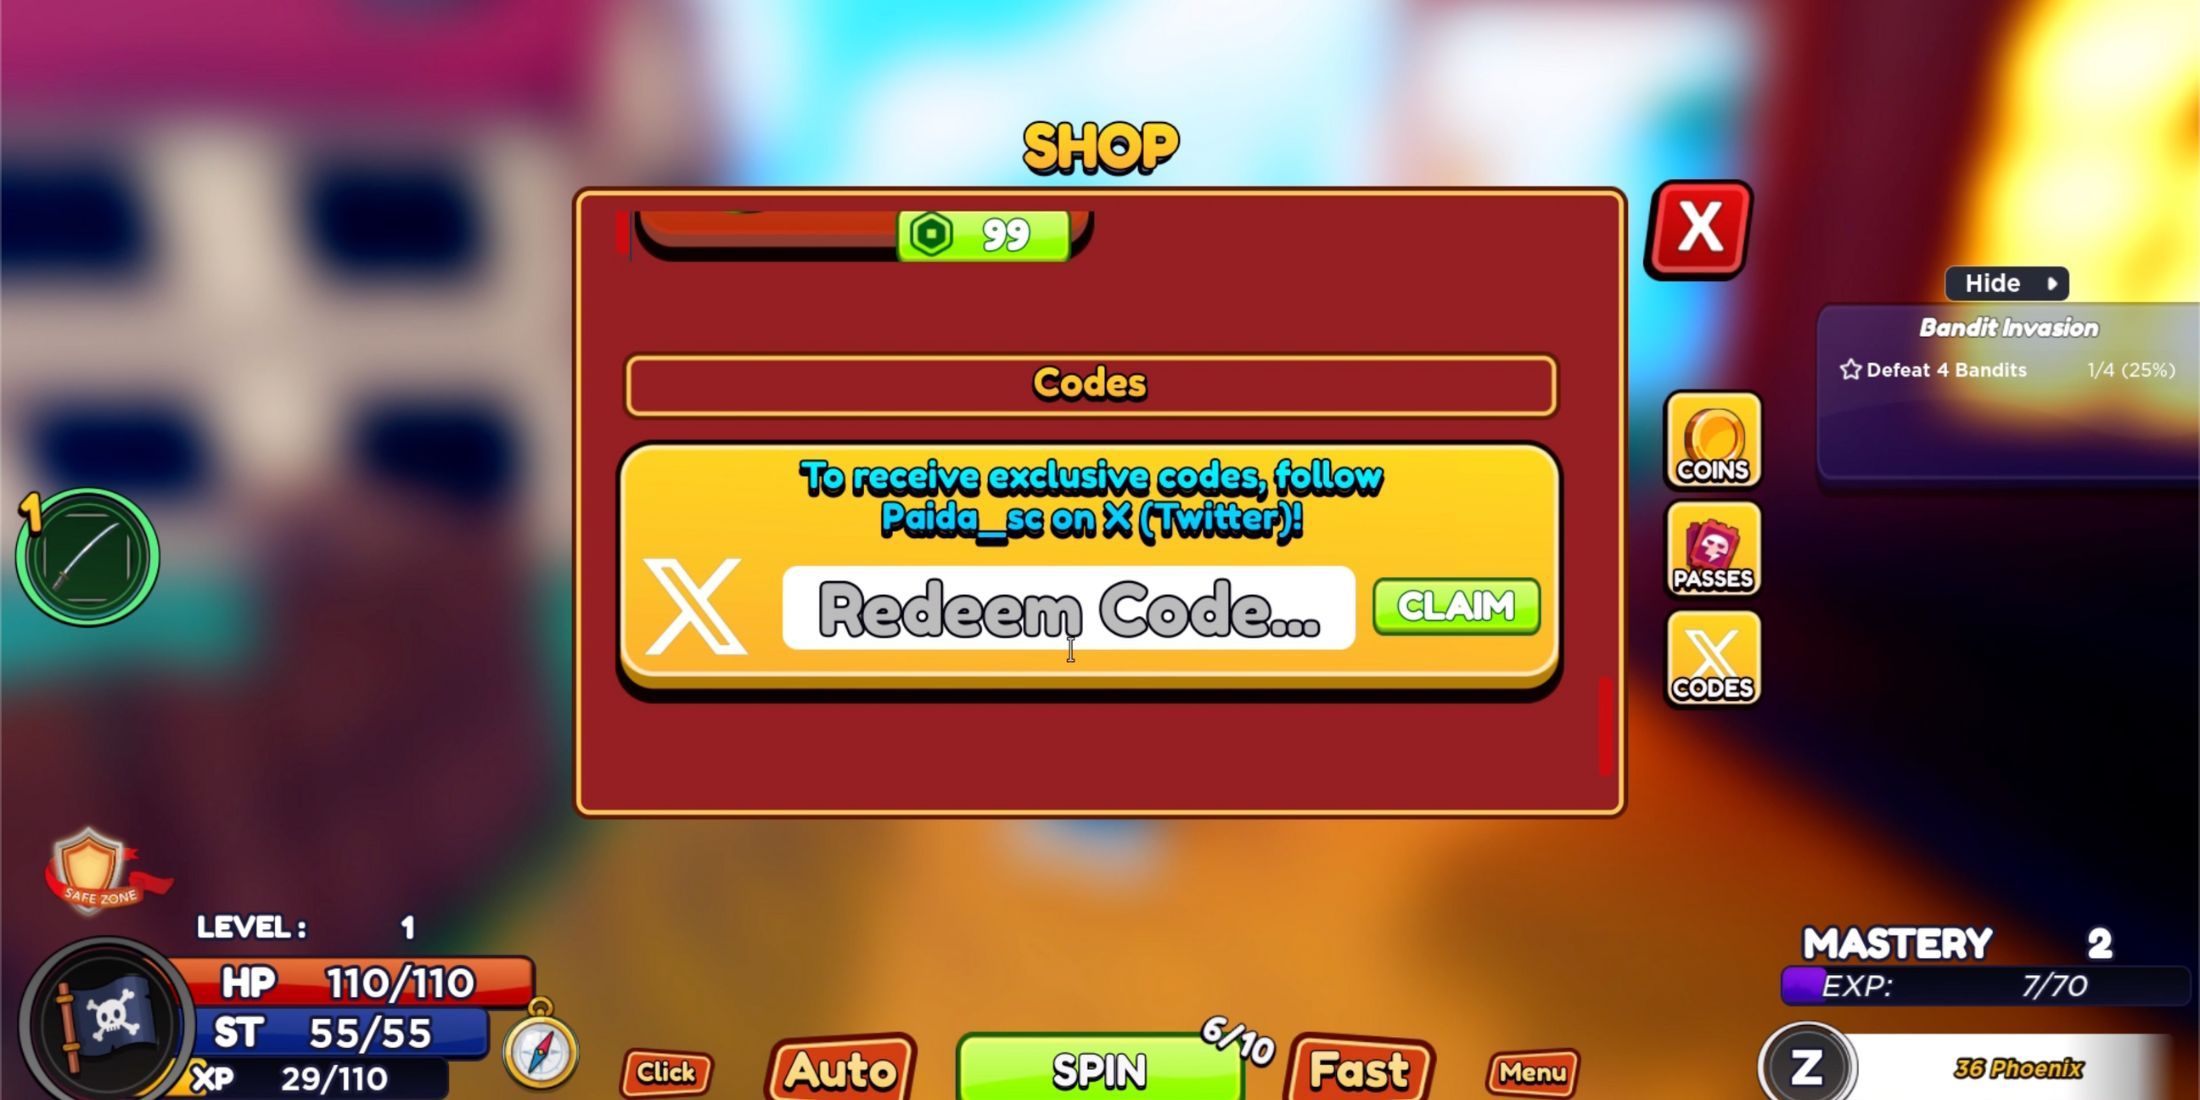 PIECE RNG the codes tab